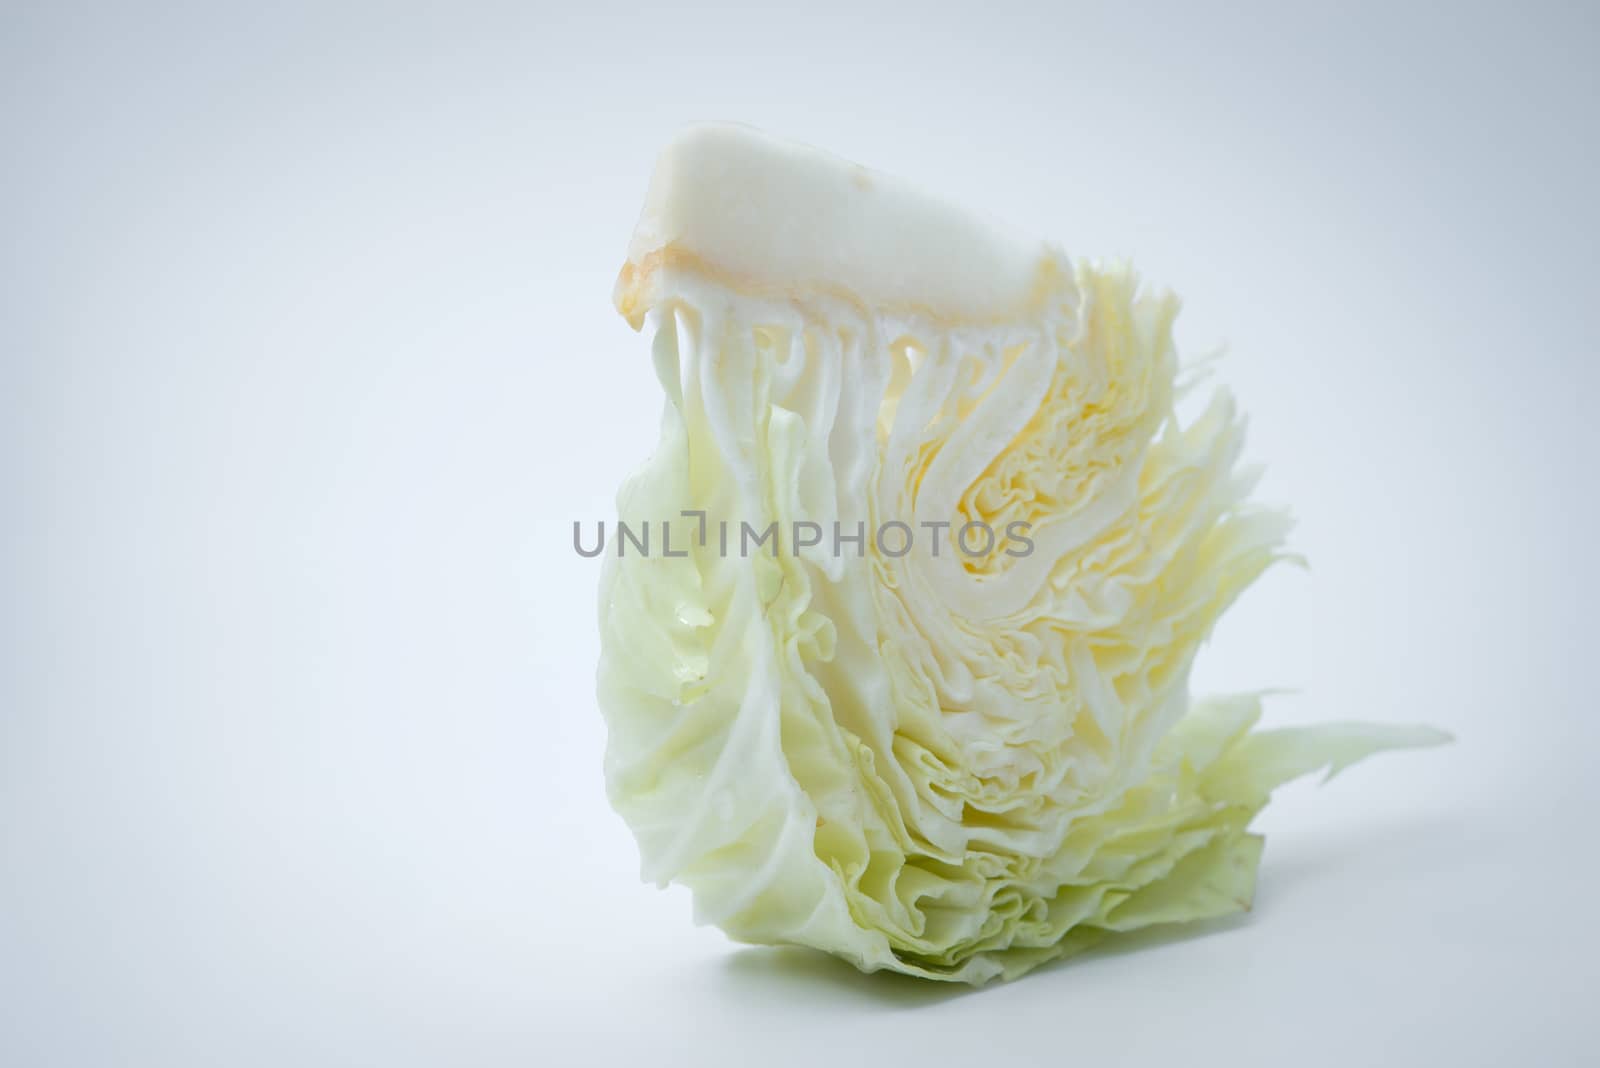 sliced cabbage on white background